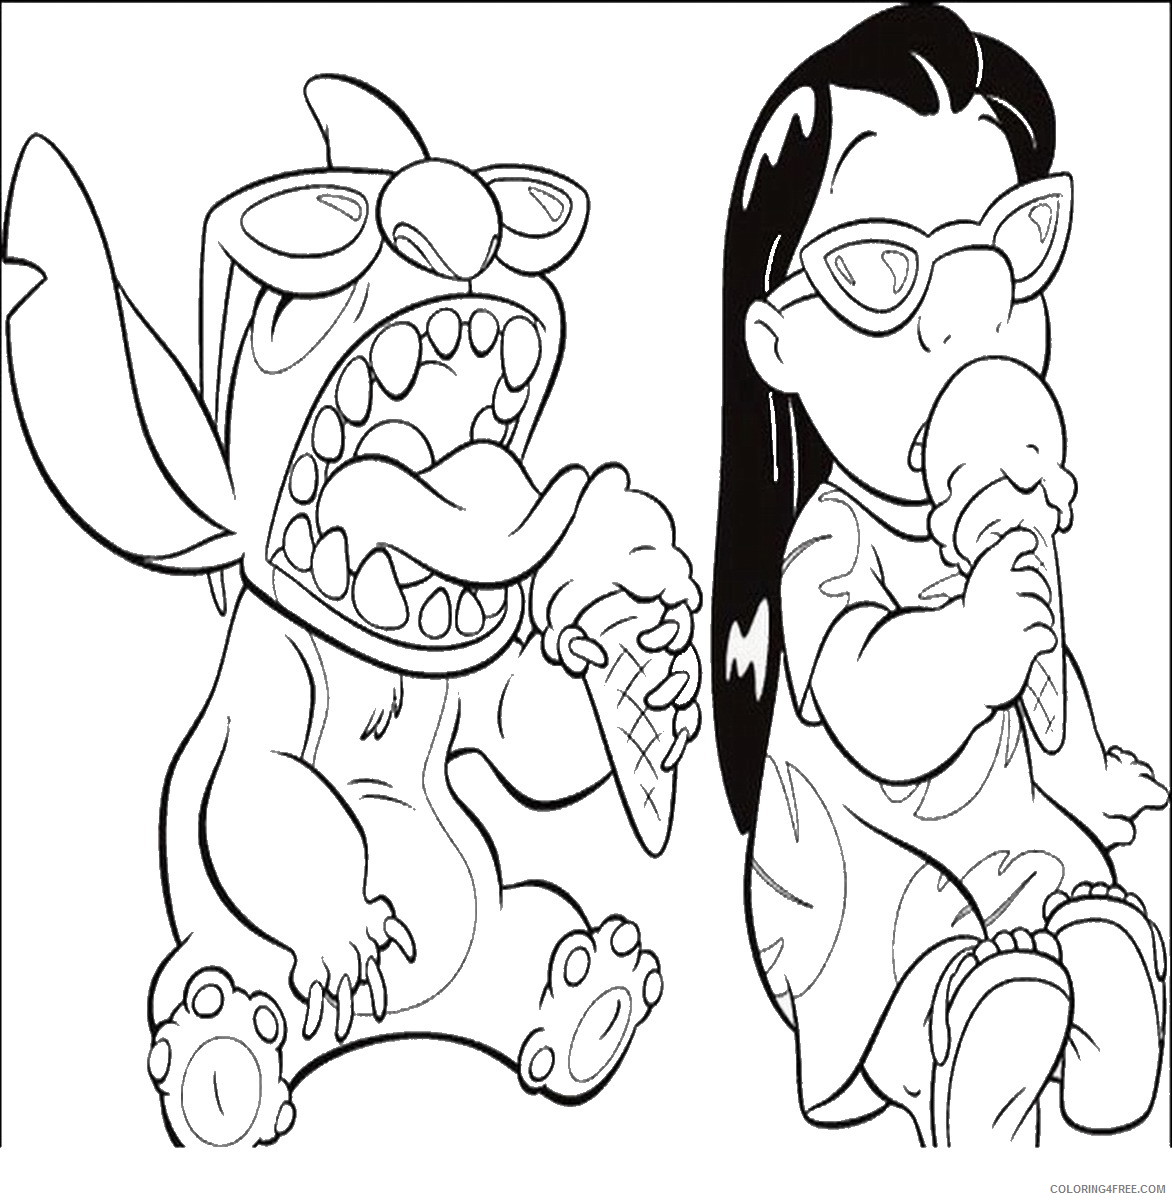 Lilo and Stitch Coloring Pages Cartoons lilo_and_stitch_cl_03 Printable 2020 3796 Coloring4free